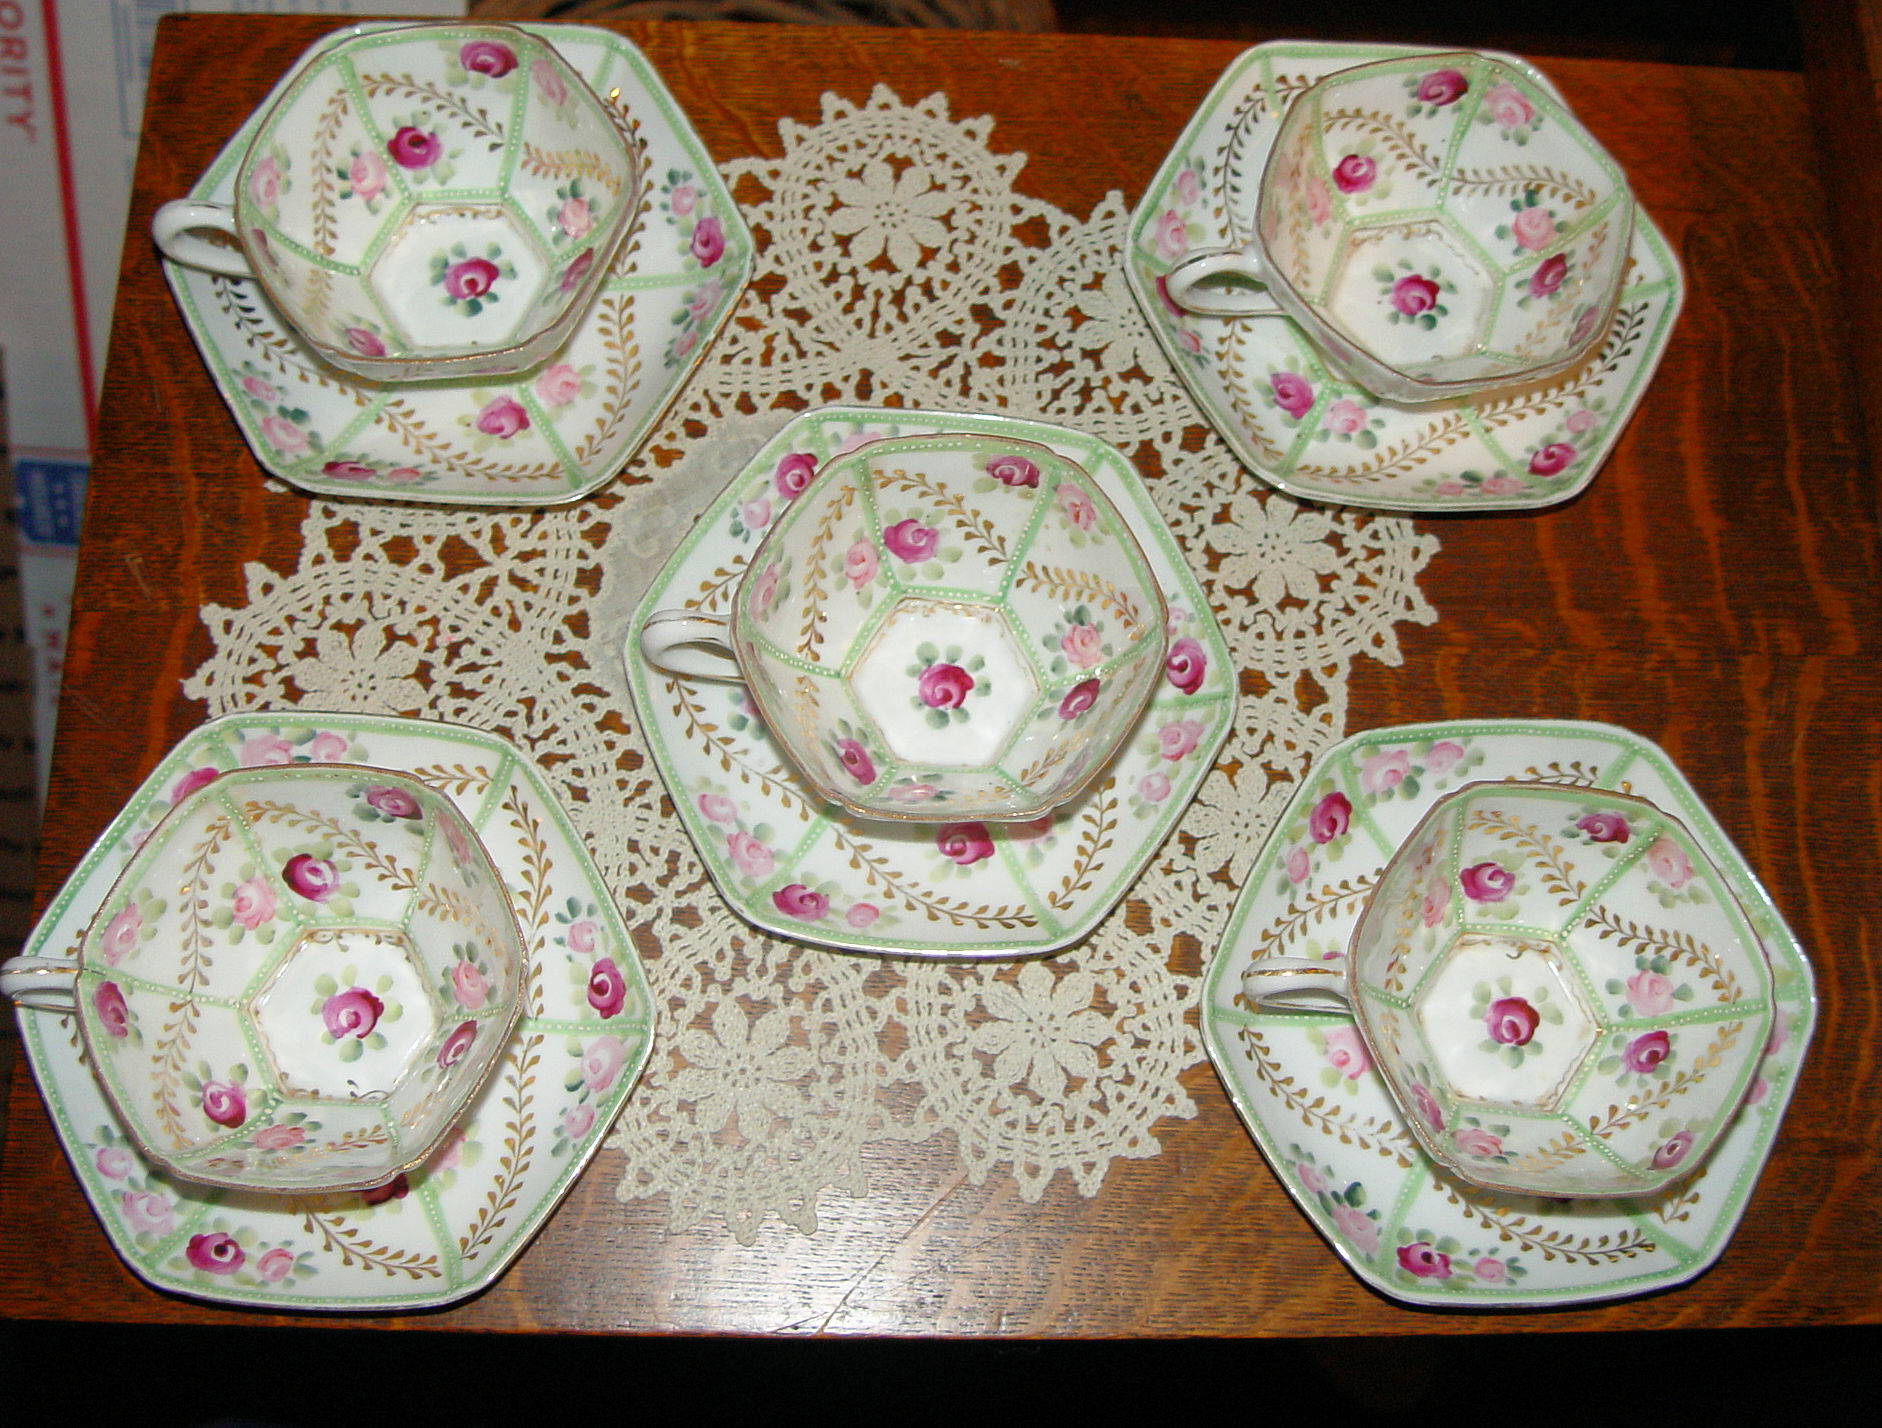 Six Octagon Cup &
                                        Saucers: Burgundy Rose, Green,
                                        & Gold Raised Texture